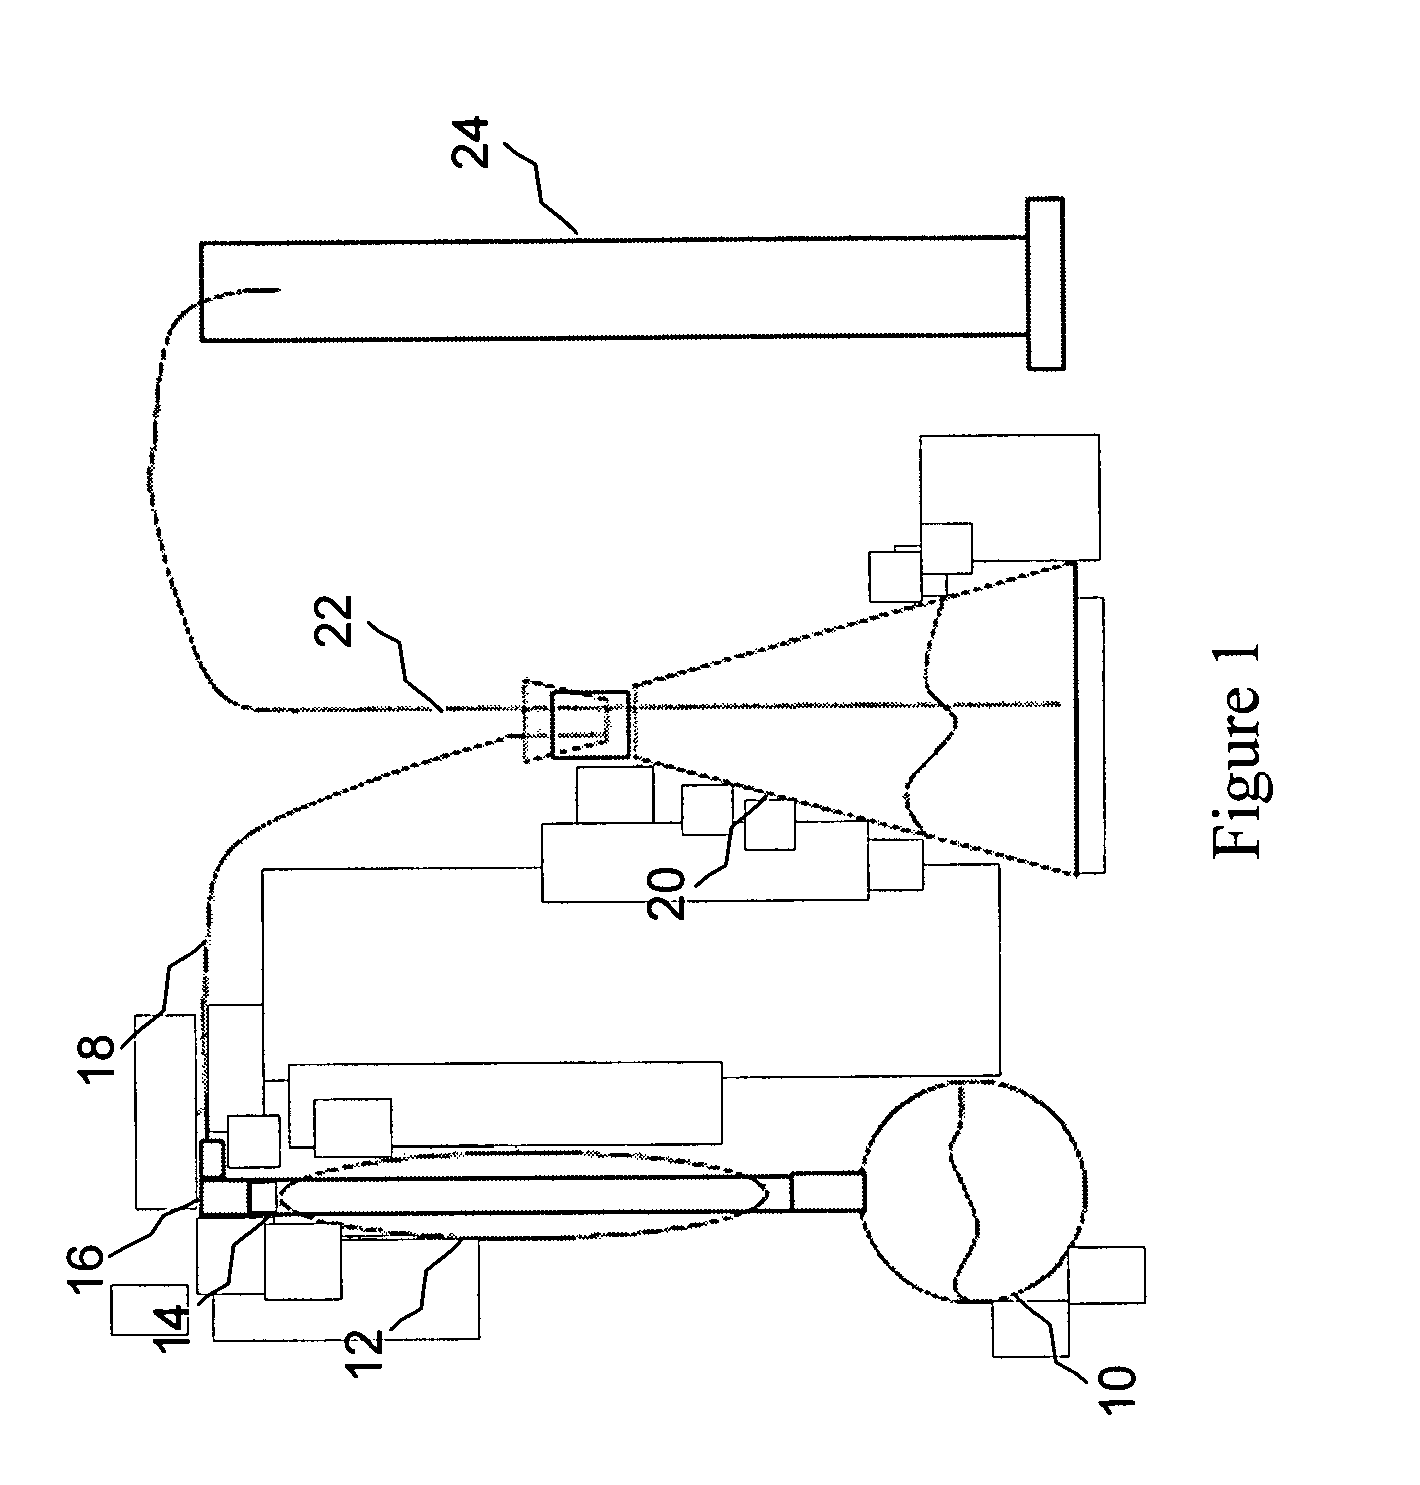 Methods of controlled acidization in a wellbore